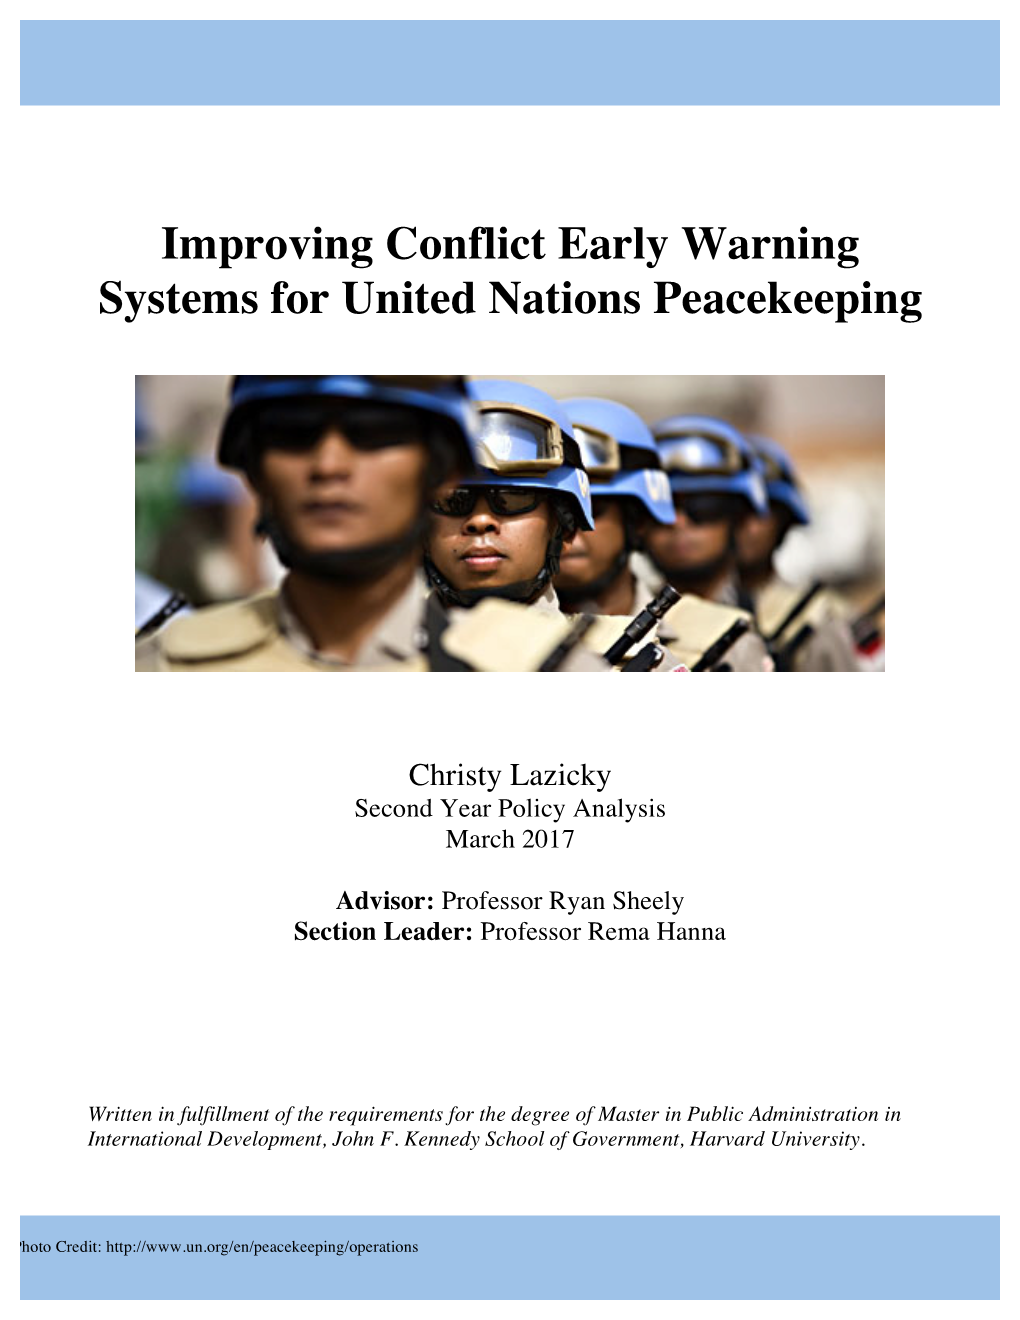 Improving Conflict Early Warning Systems for United Nations Peacekeeping